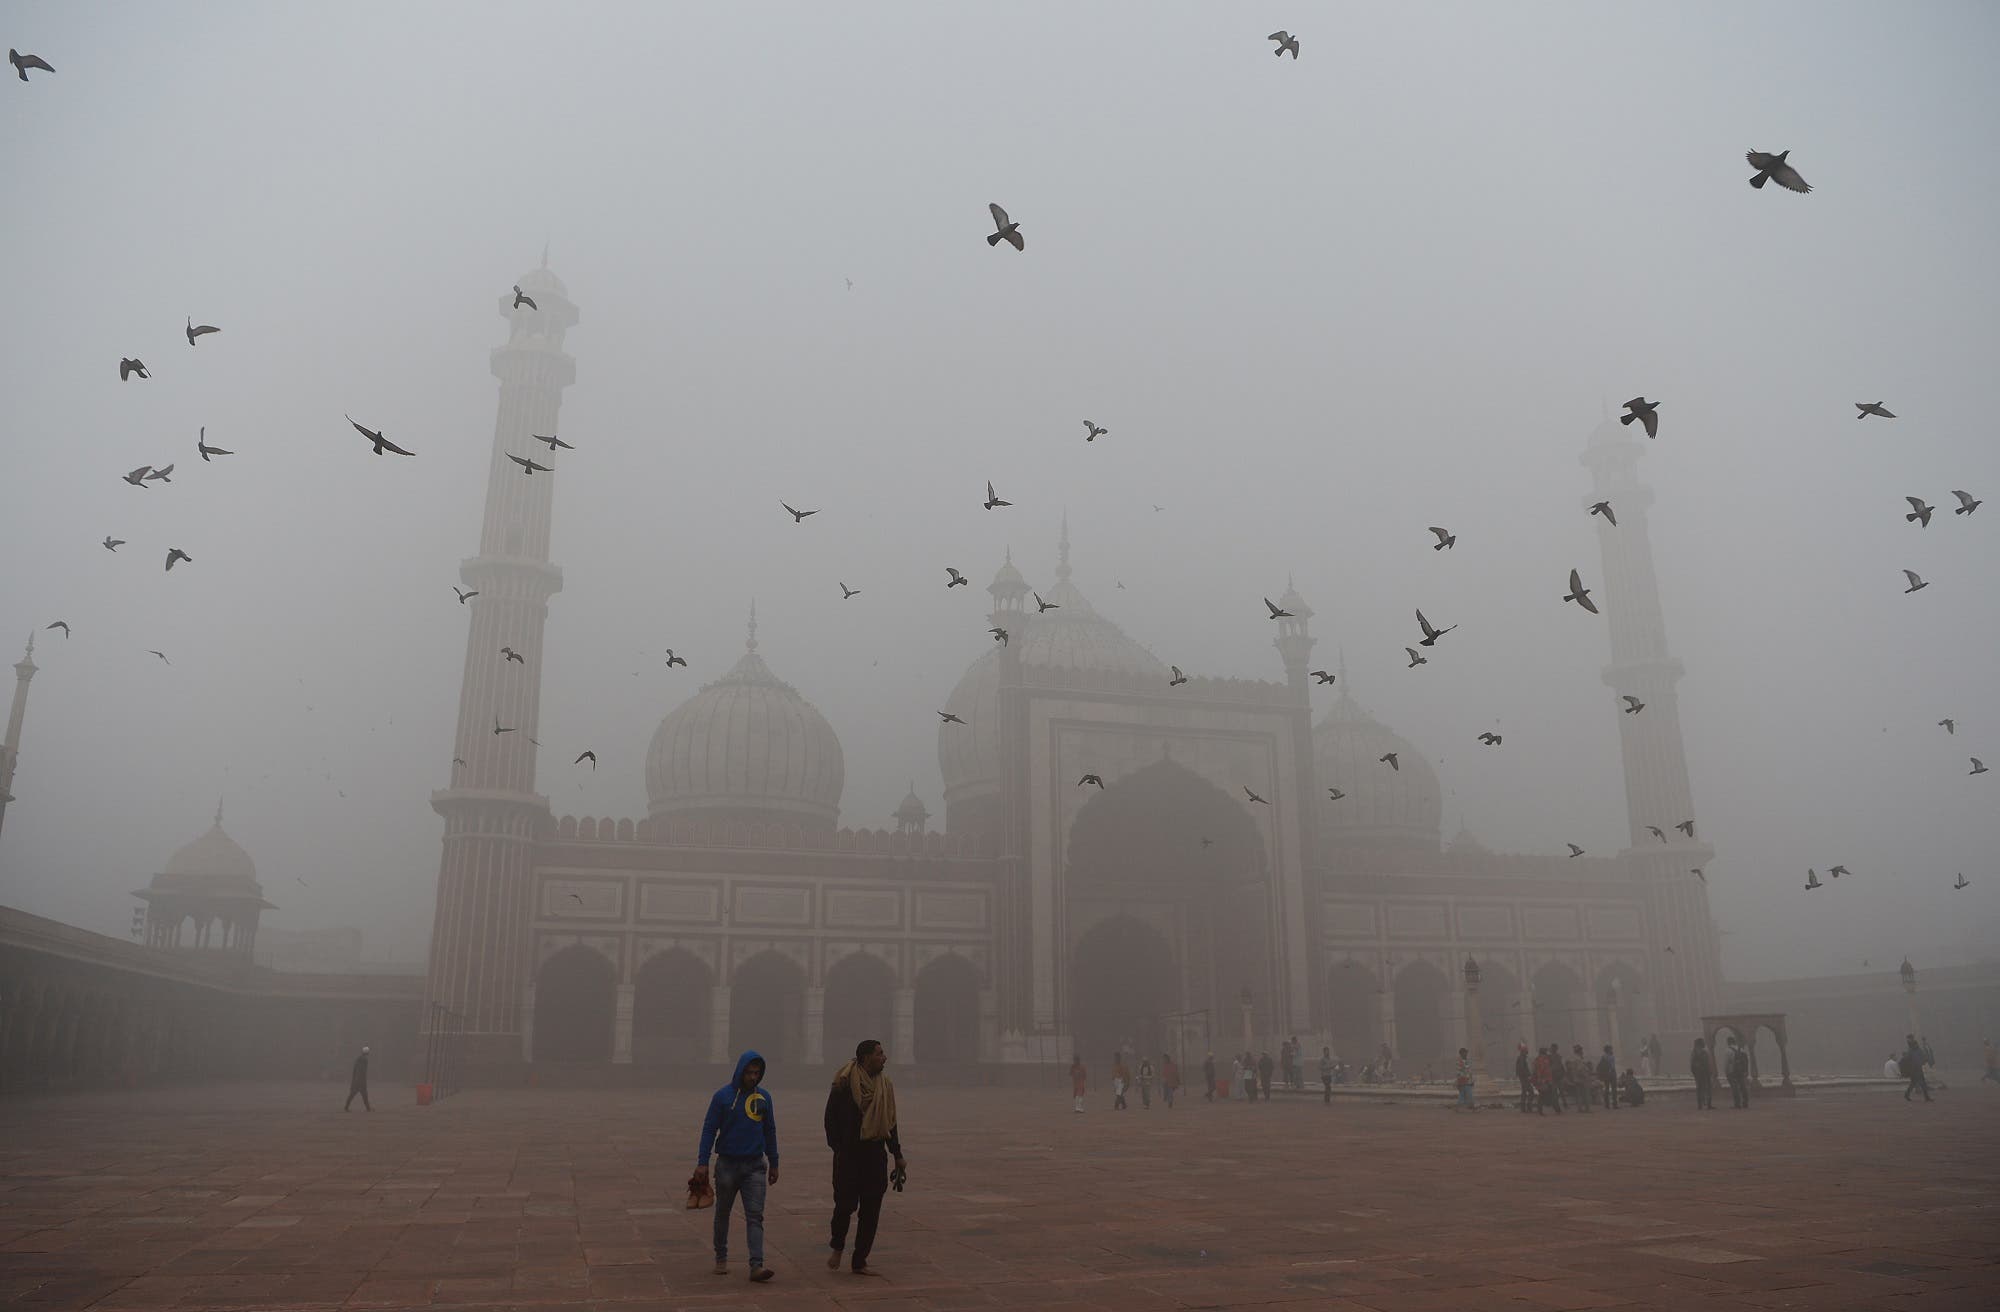 Indian visitors walk through the courtyard of Jama Masjid amid heavy smog in the old quarters of New Delhi on November 8, 2017. (AFP)